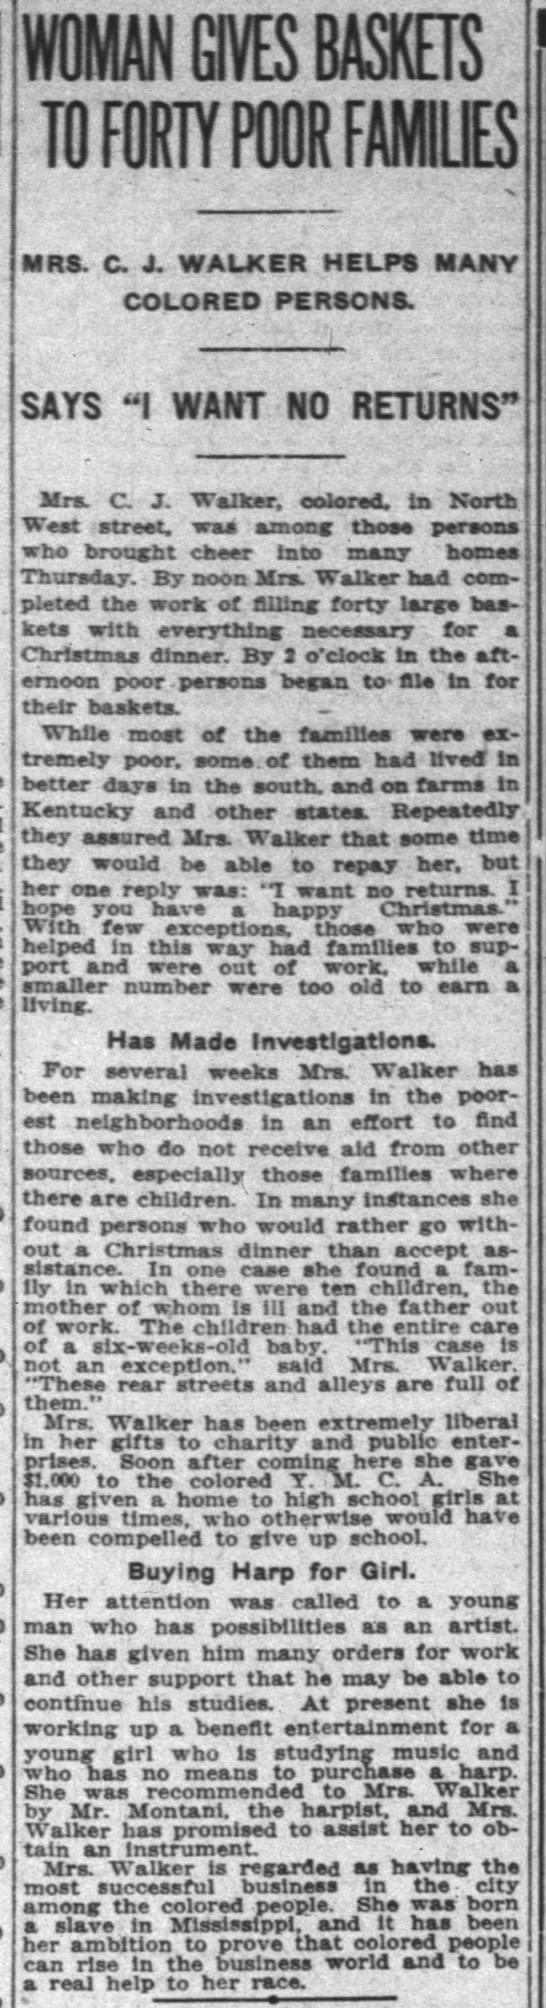 Madam C.J. Walker donates Christmas dinners to 40 needy families in Indianapolis - 